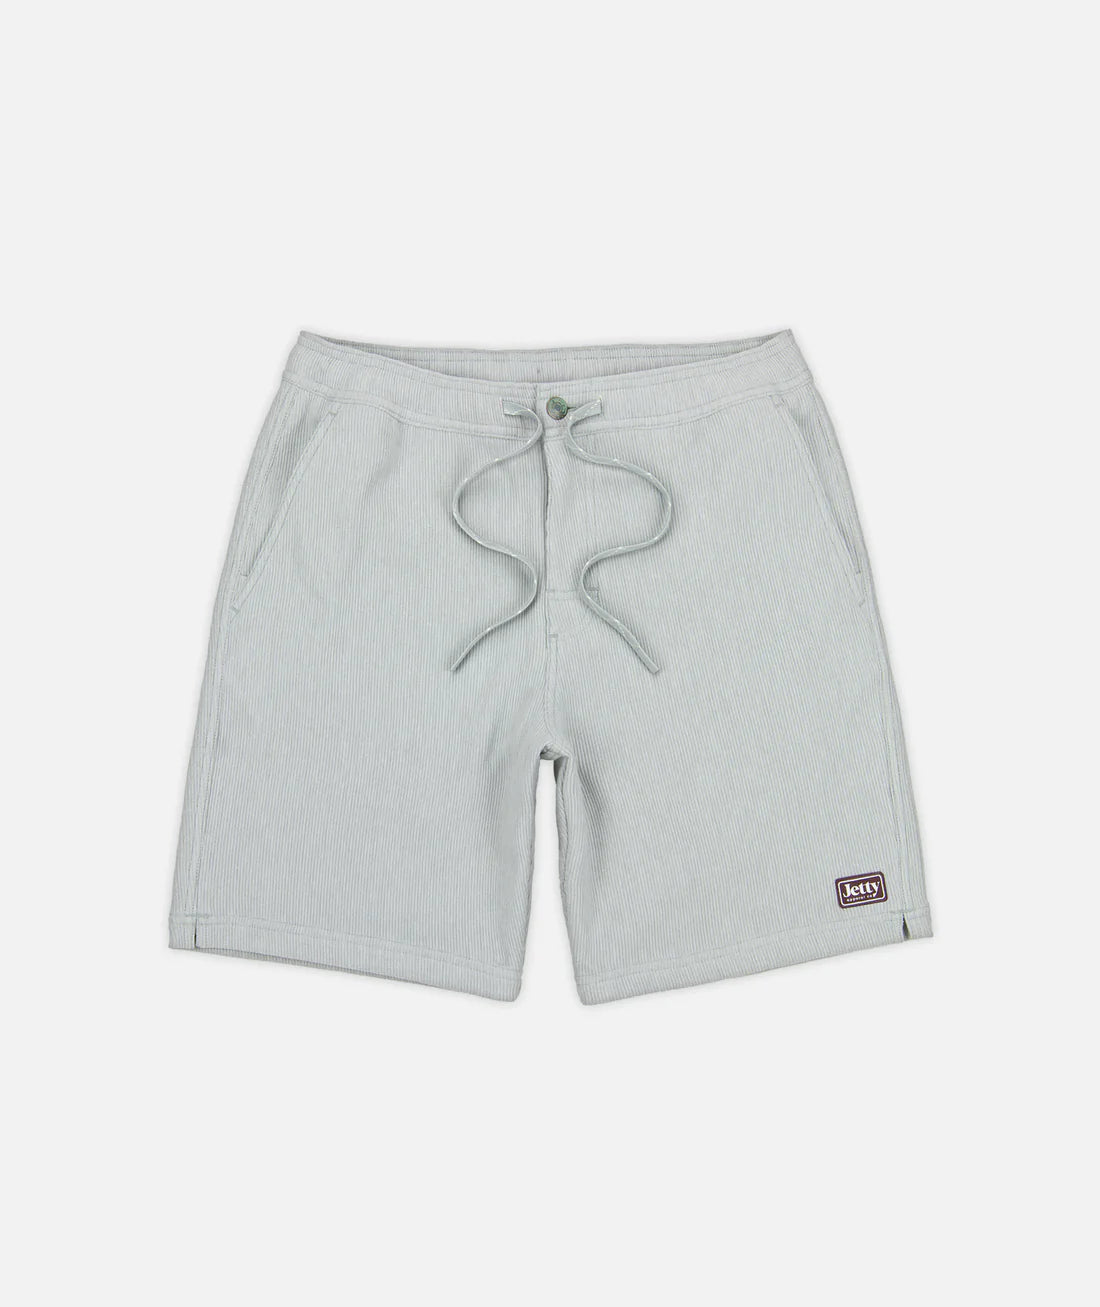 Jetty Fairview Cord Short - Grey